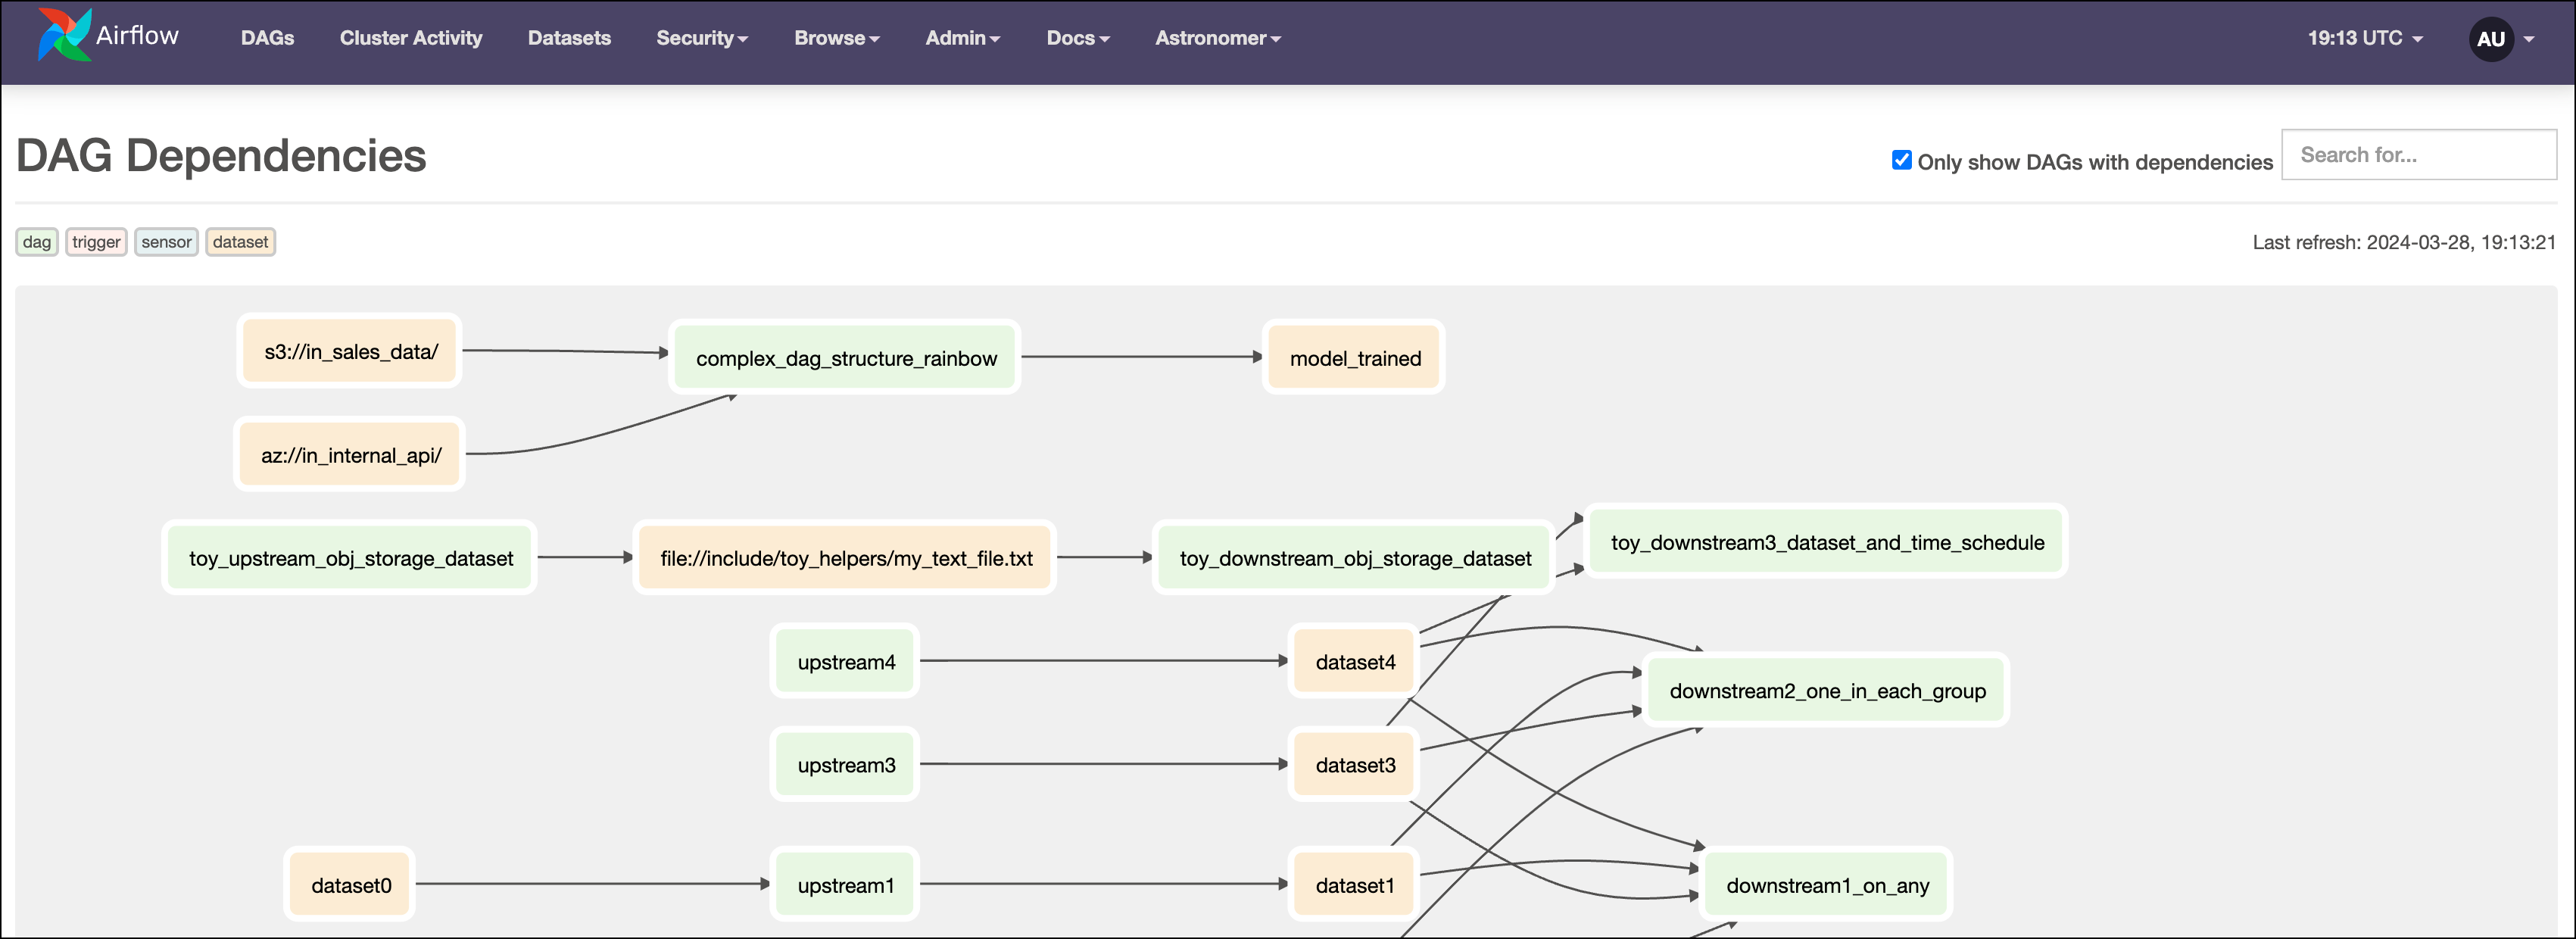 Screenshot of the DAG Dependencies view showing several DAGs and Datasets that depend on each other.